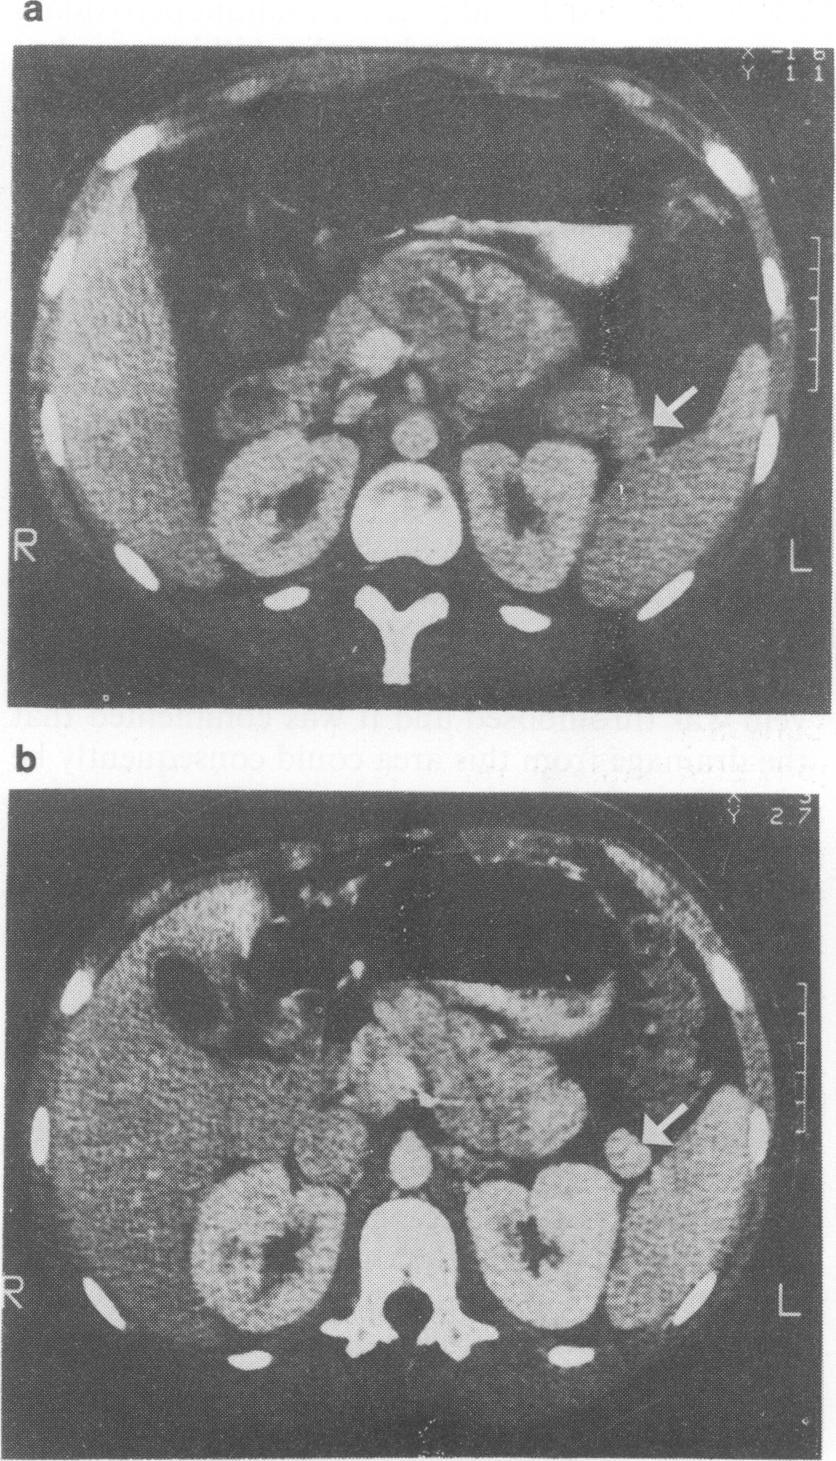 Hyperinsulinism and hypoglycaemia persisted post-operatively. A further abdominal CT scan was non-contributory and selective portal venous sampling showed an insulin peak in the portal vein.